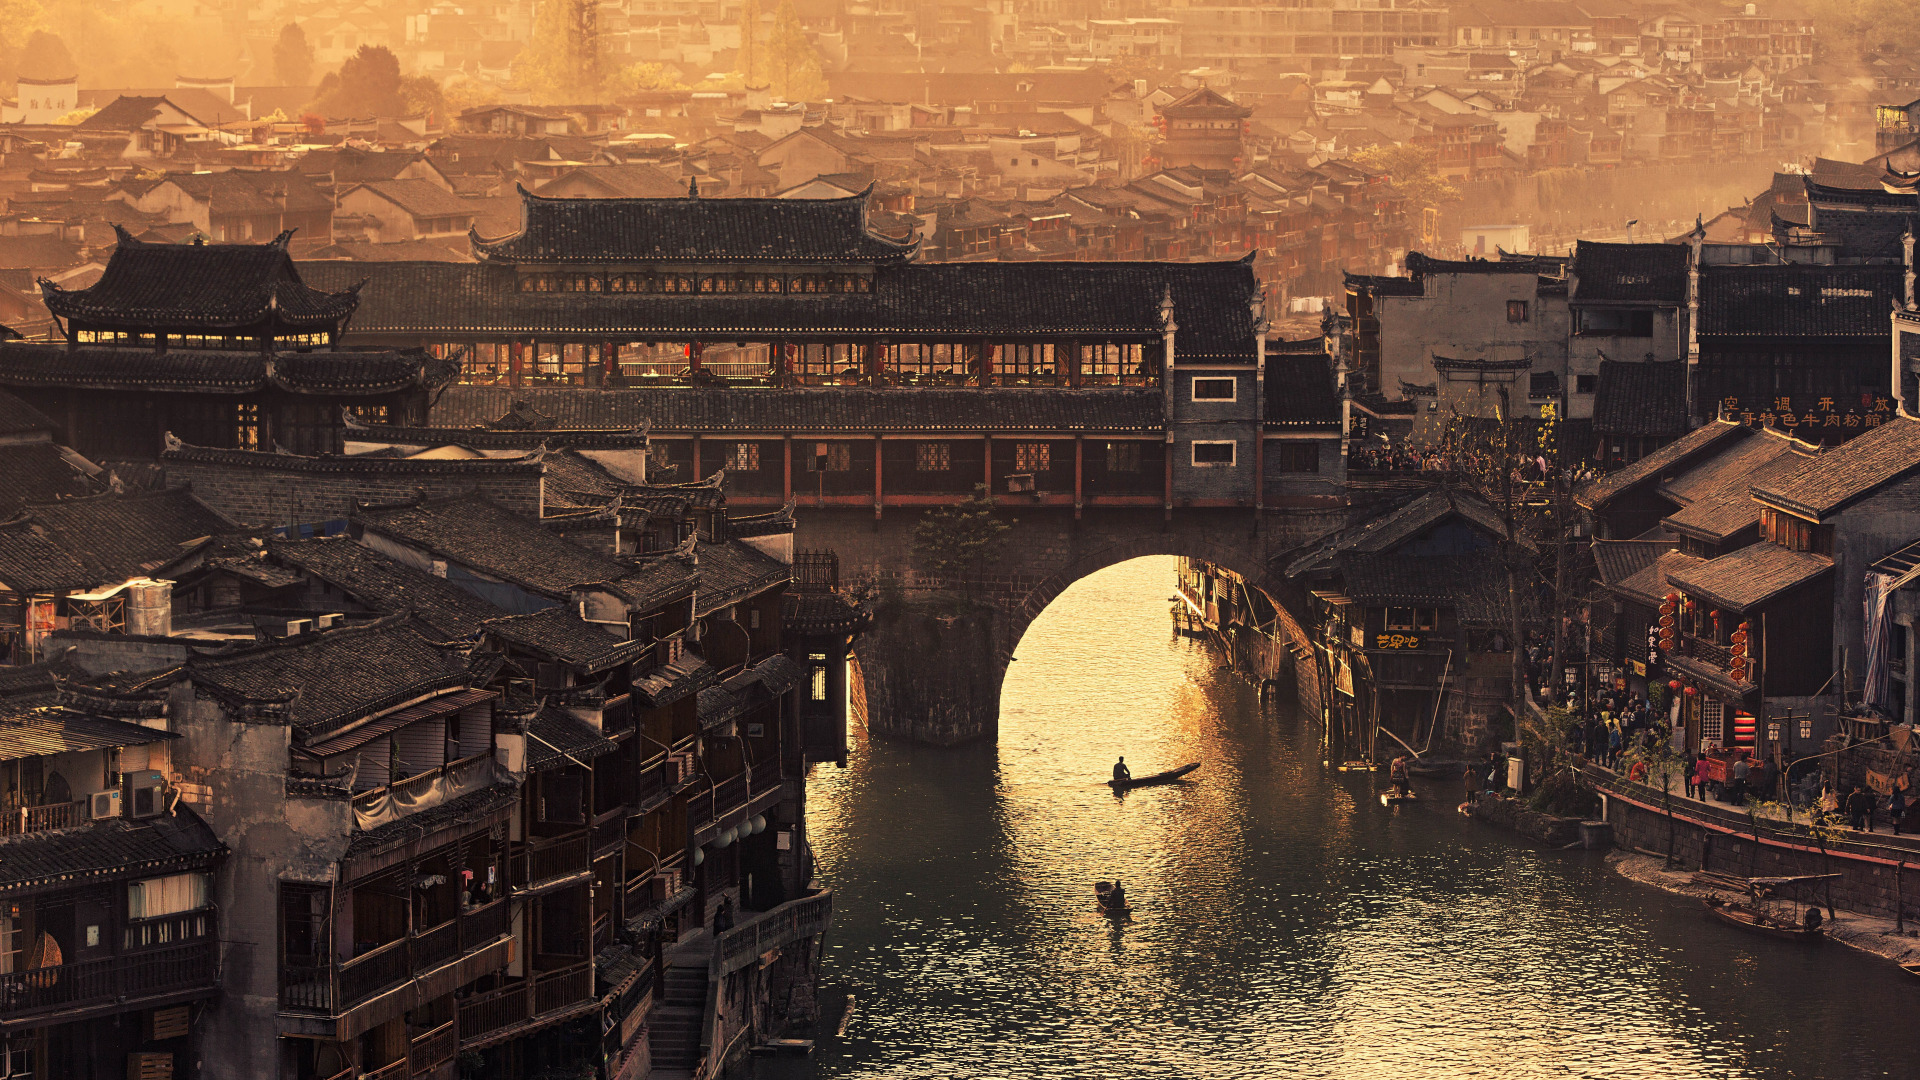 General 1920x1080 architecture building city cityscape Asia Chinese architecture China rooftops river boat